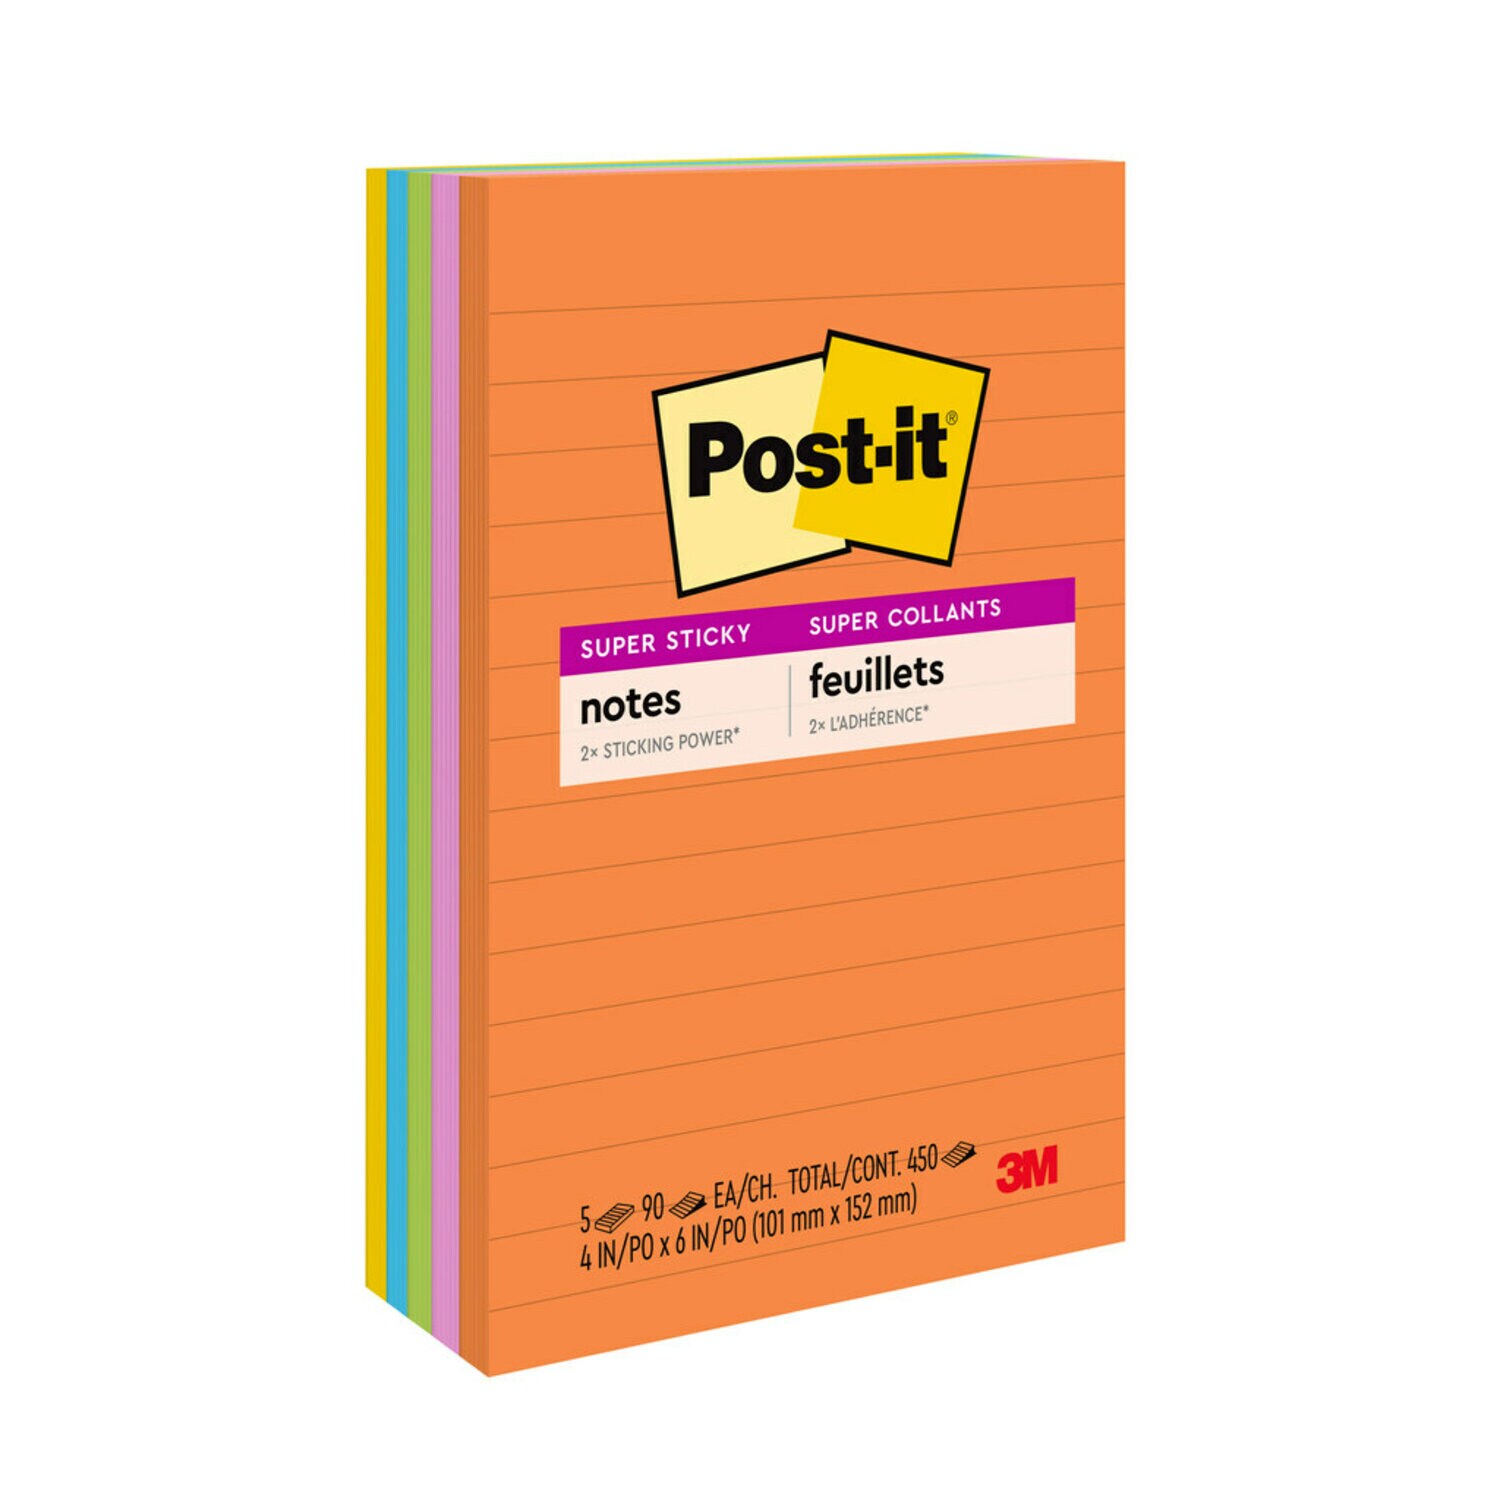 7100235569 - Post-it Super Sticky Notes 660-5SSUC, 4 in x 6 in (101 mm x 152 mm)